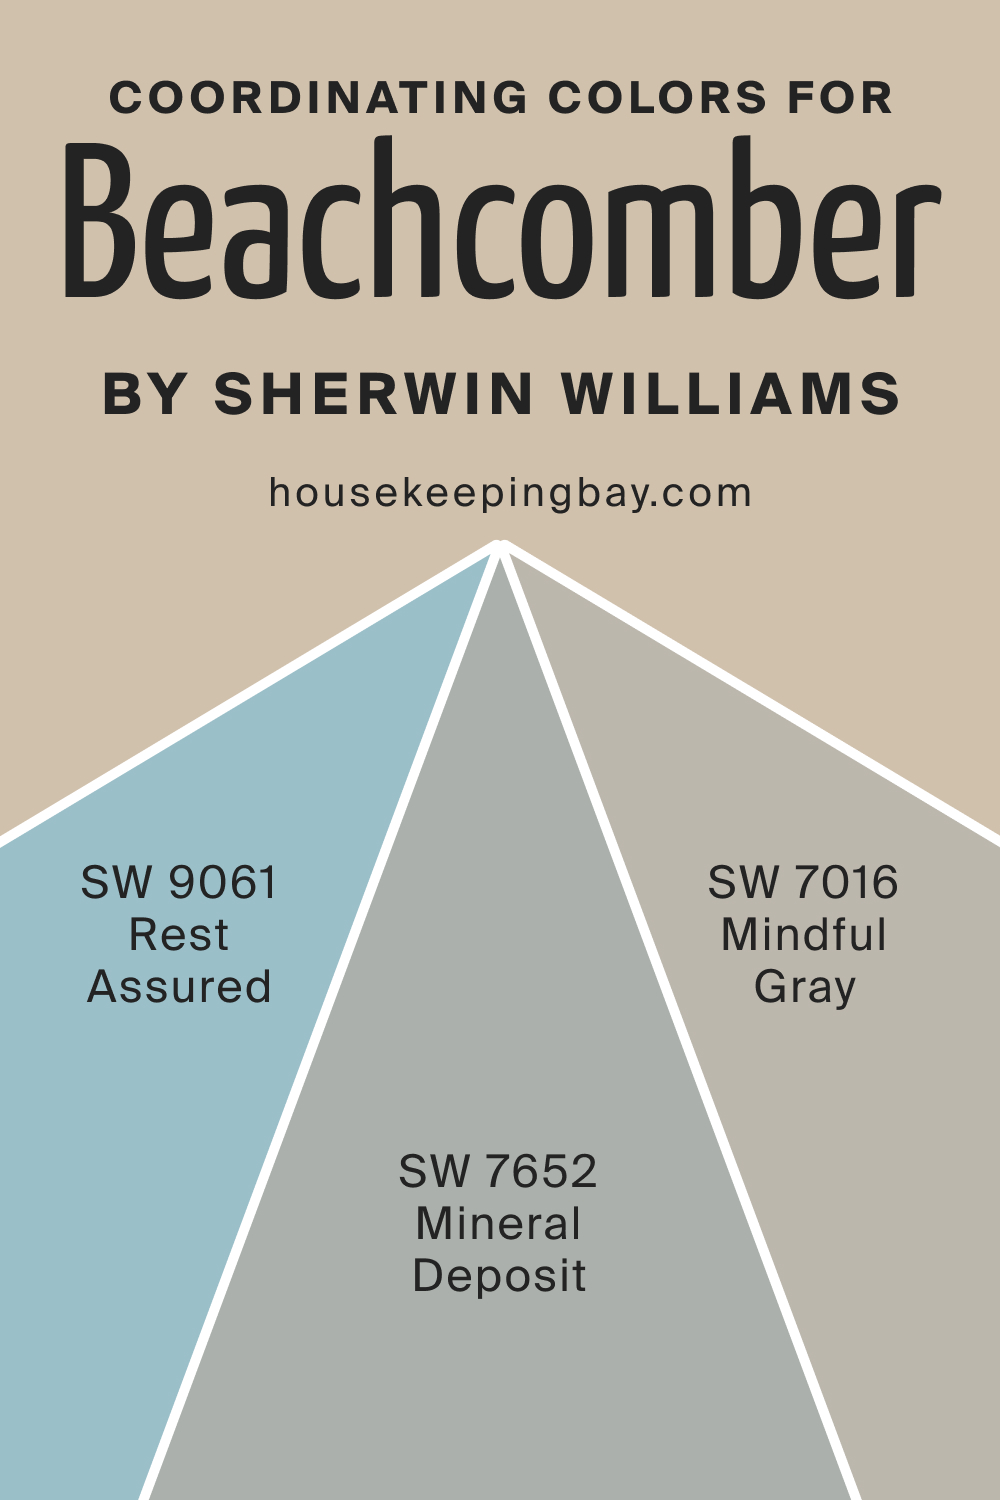 Coordinating Colors for SW 9617 Beachcomber by Sherwin Williams